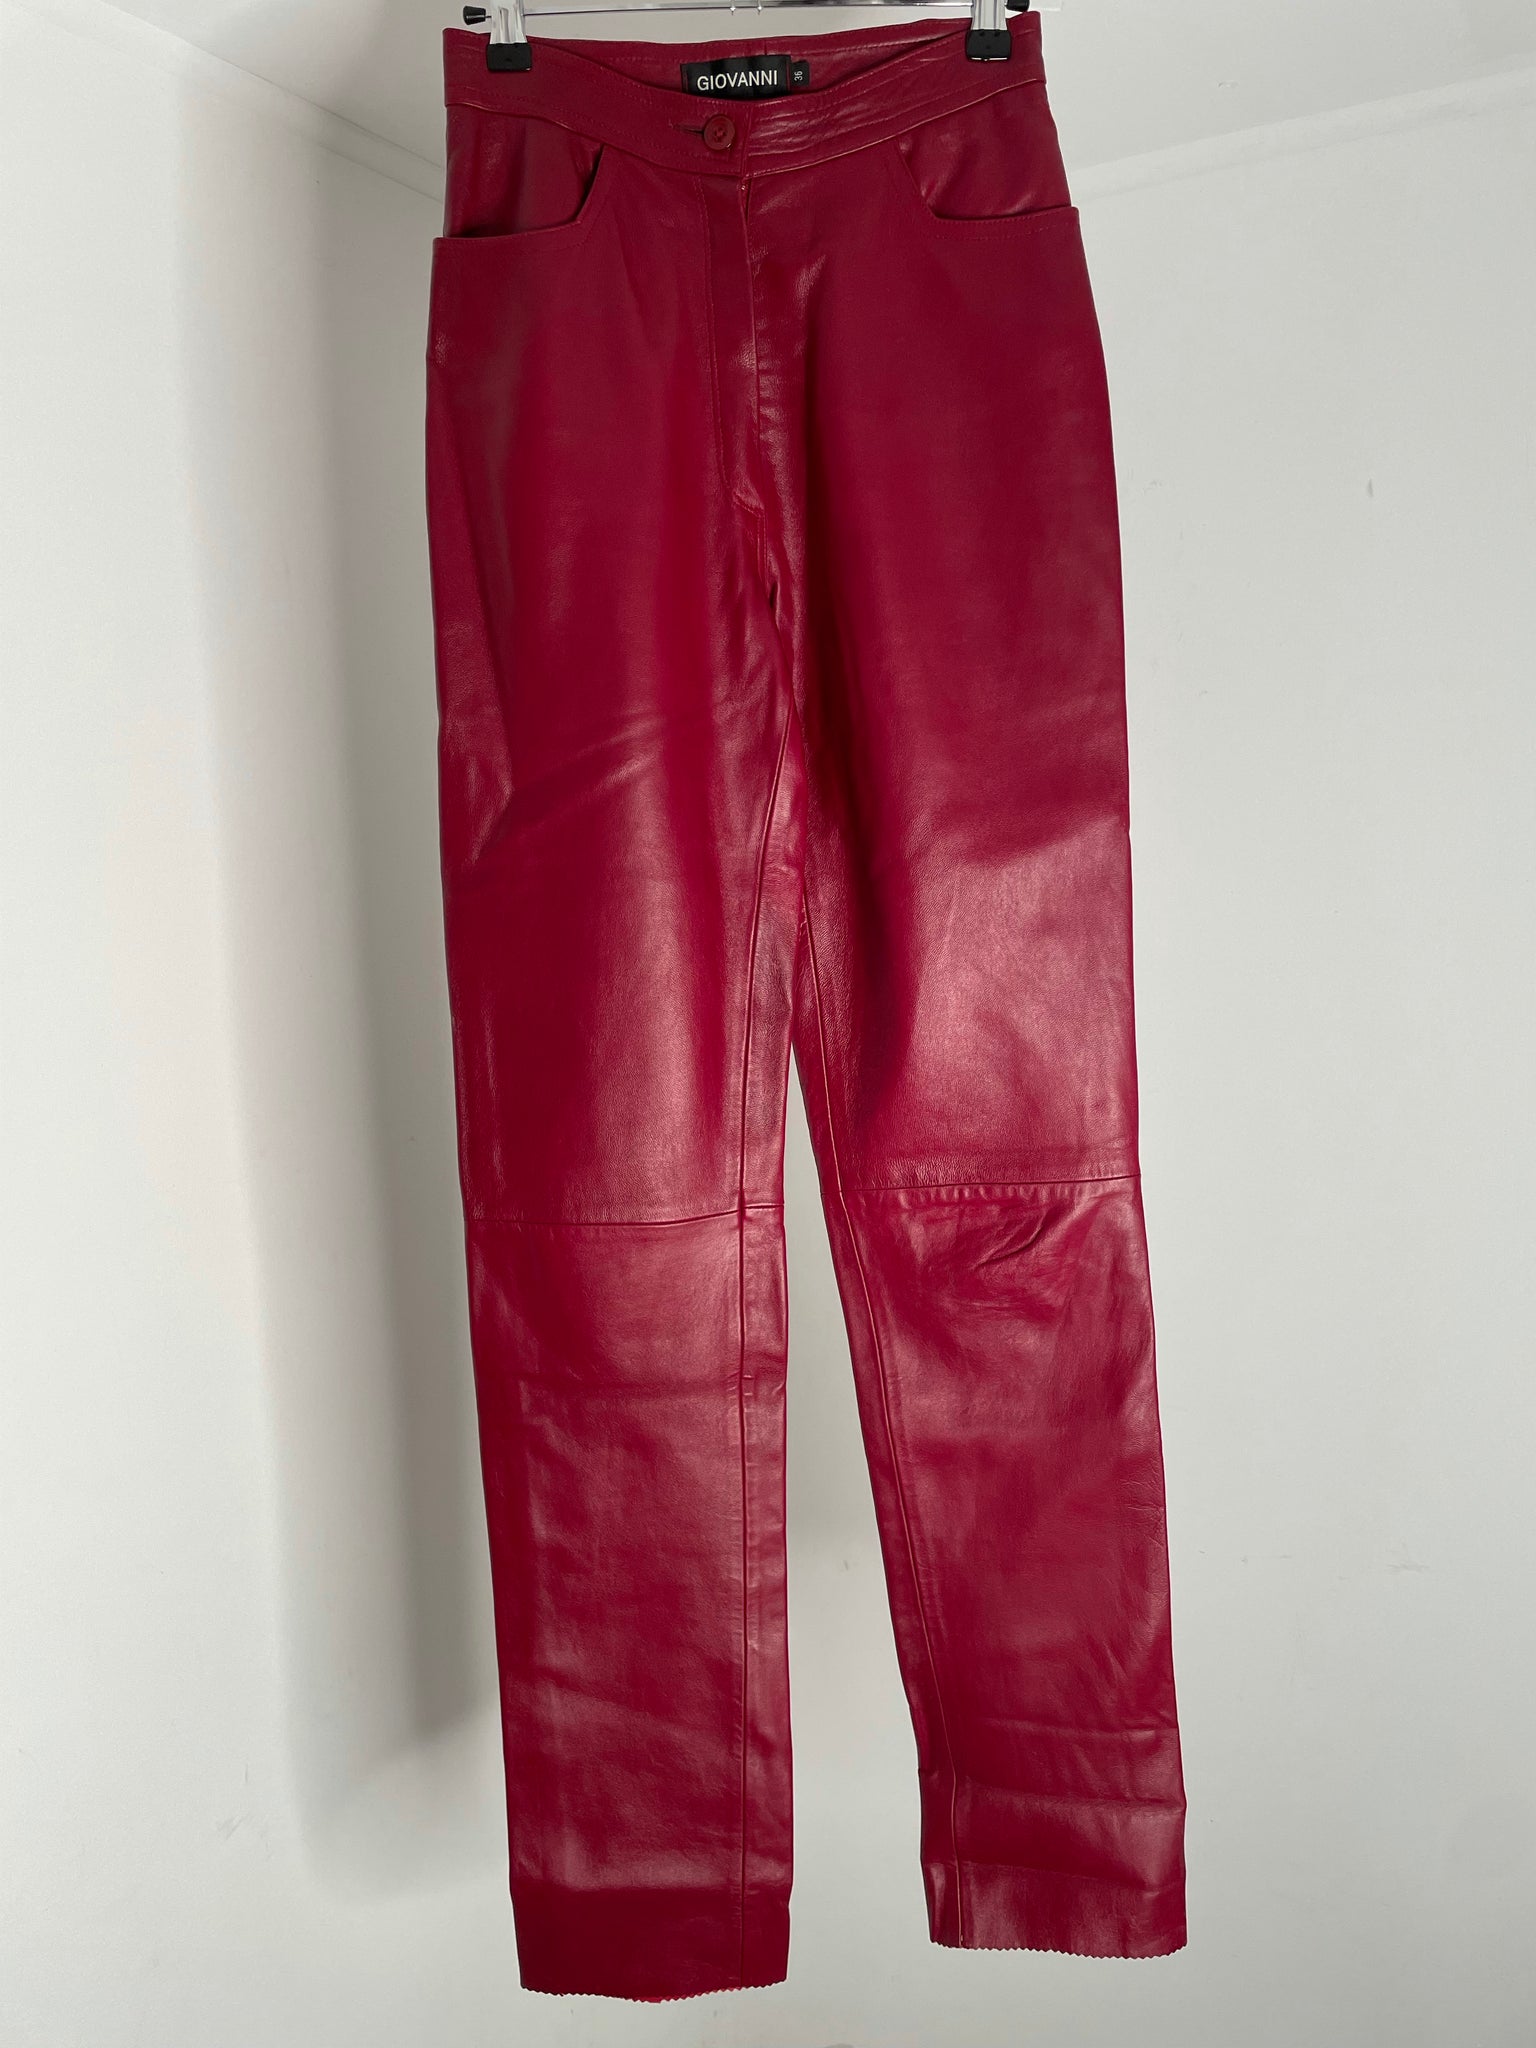 Cherry Red Leather Trouser 36